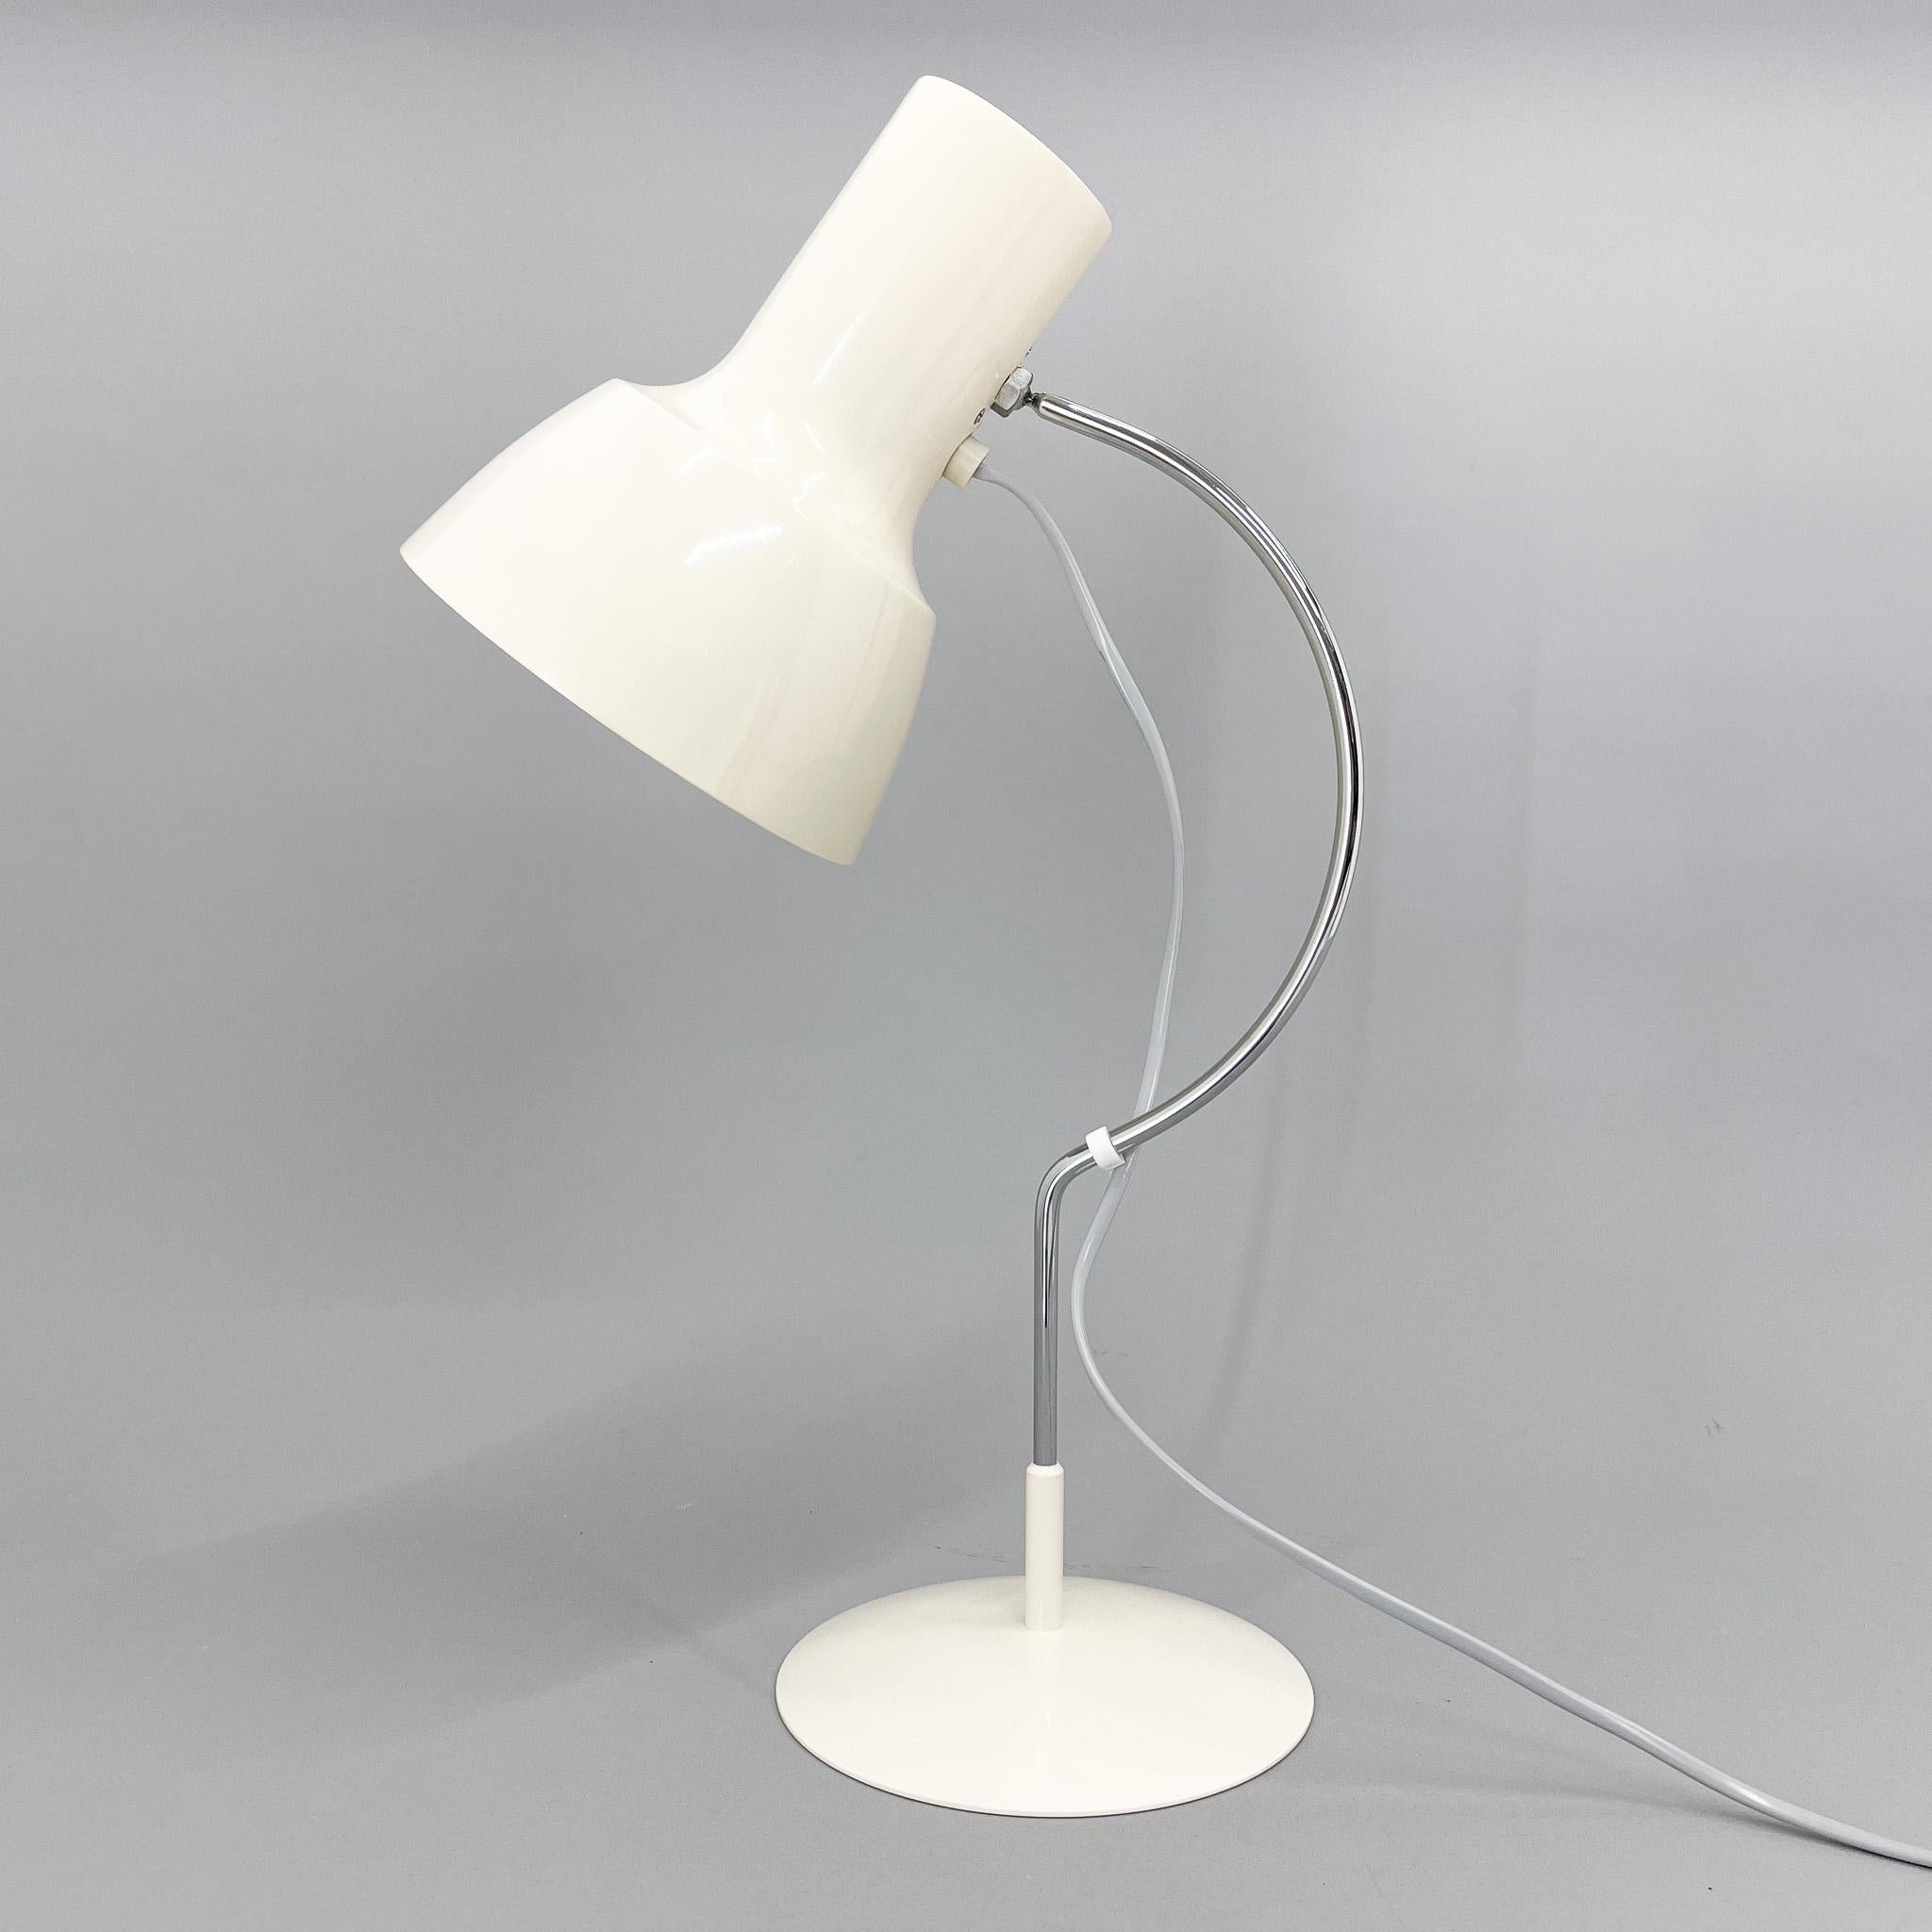 Exceptional piece! Vintage table lamp designed by famous Josef Hůrka and produced by Napako in former Czechoslovakia in the 1960's. It is never used, placed in original box with it's original guarantee certificate. Bulb: 1 x E25-E27.